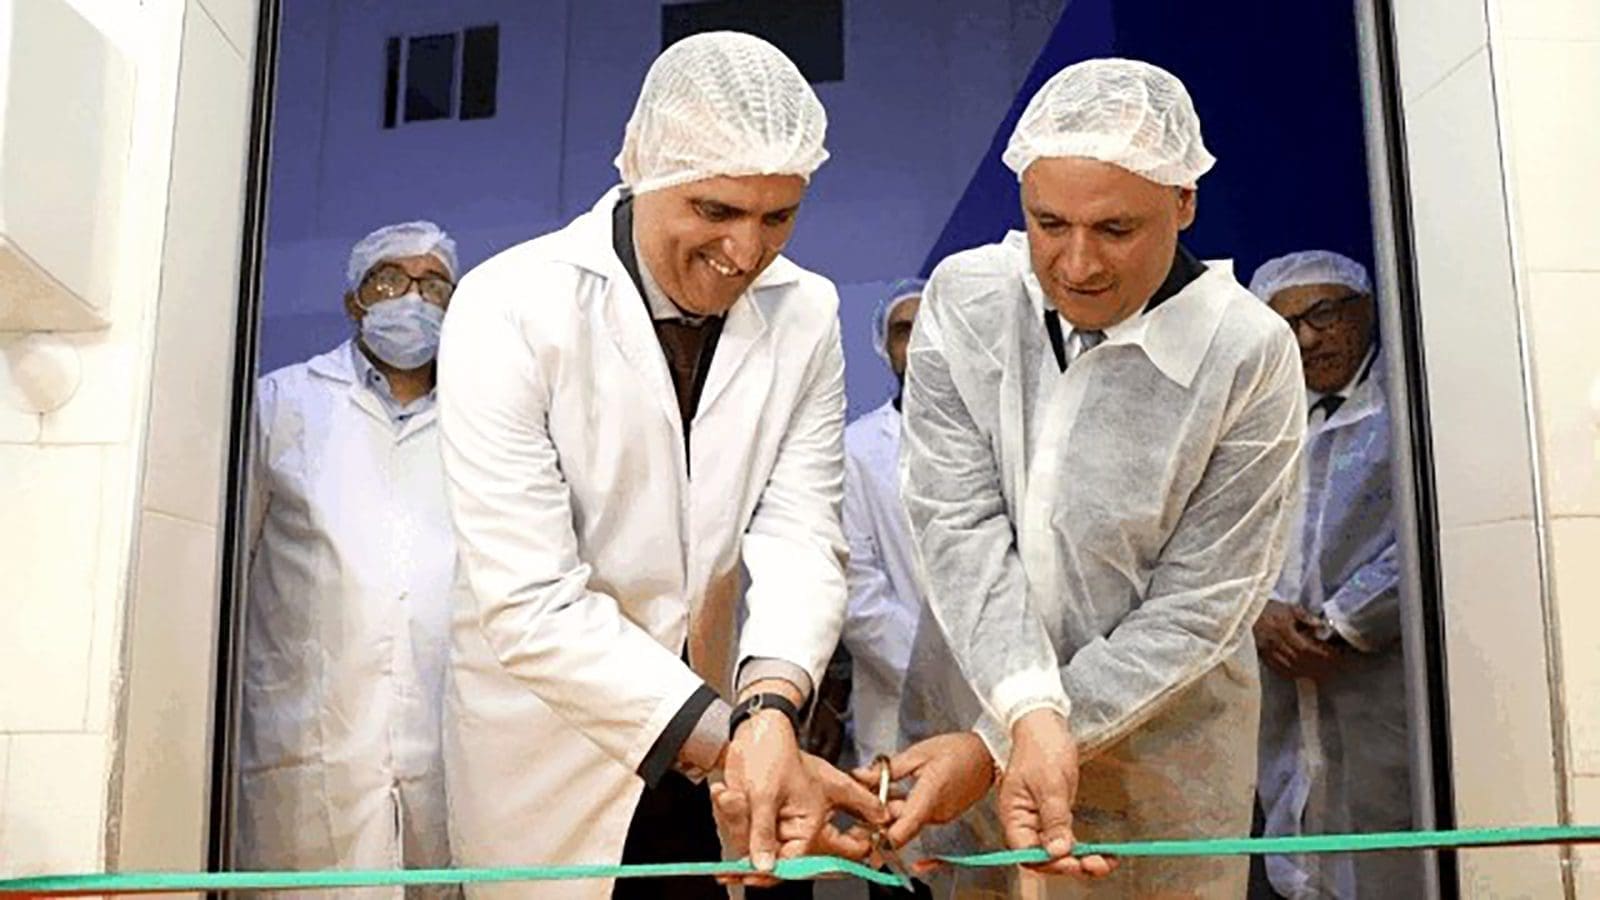 Moroccan cheese processor Oland Group invests US$8m in four new processing lines